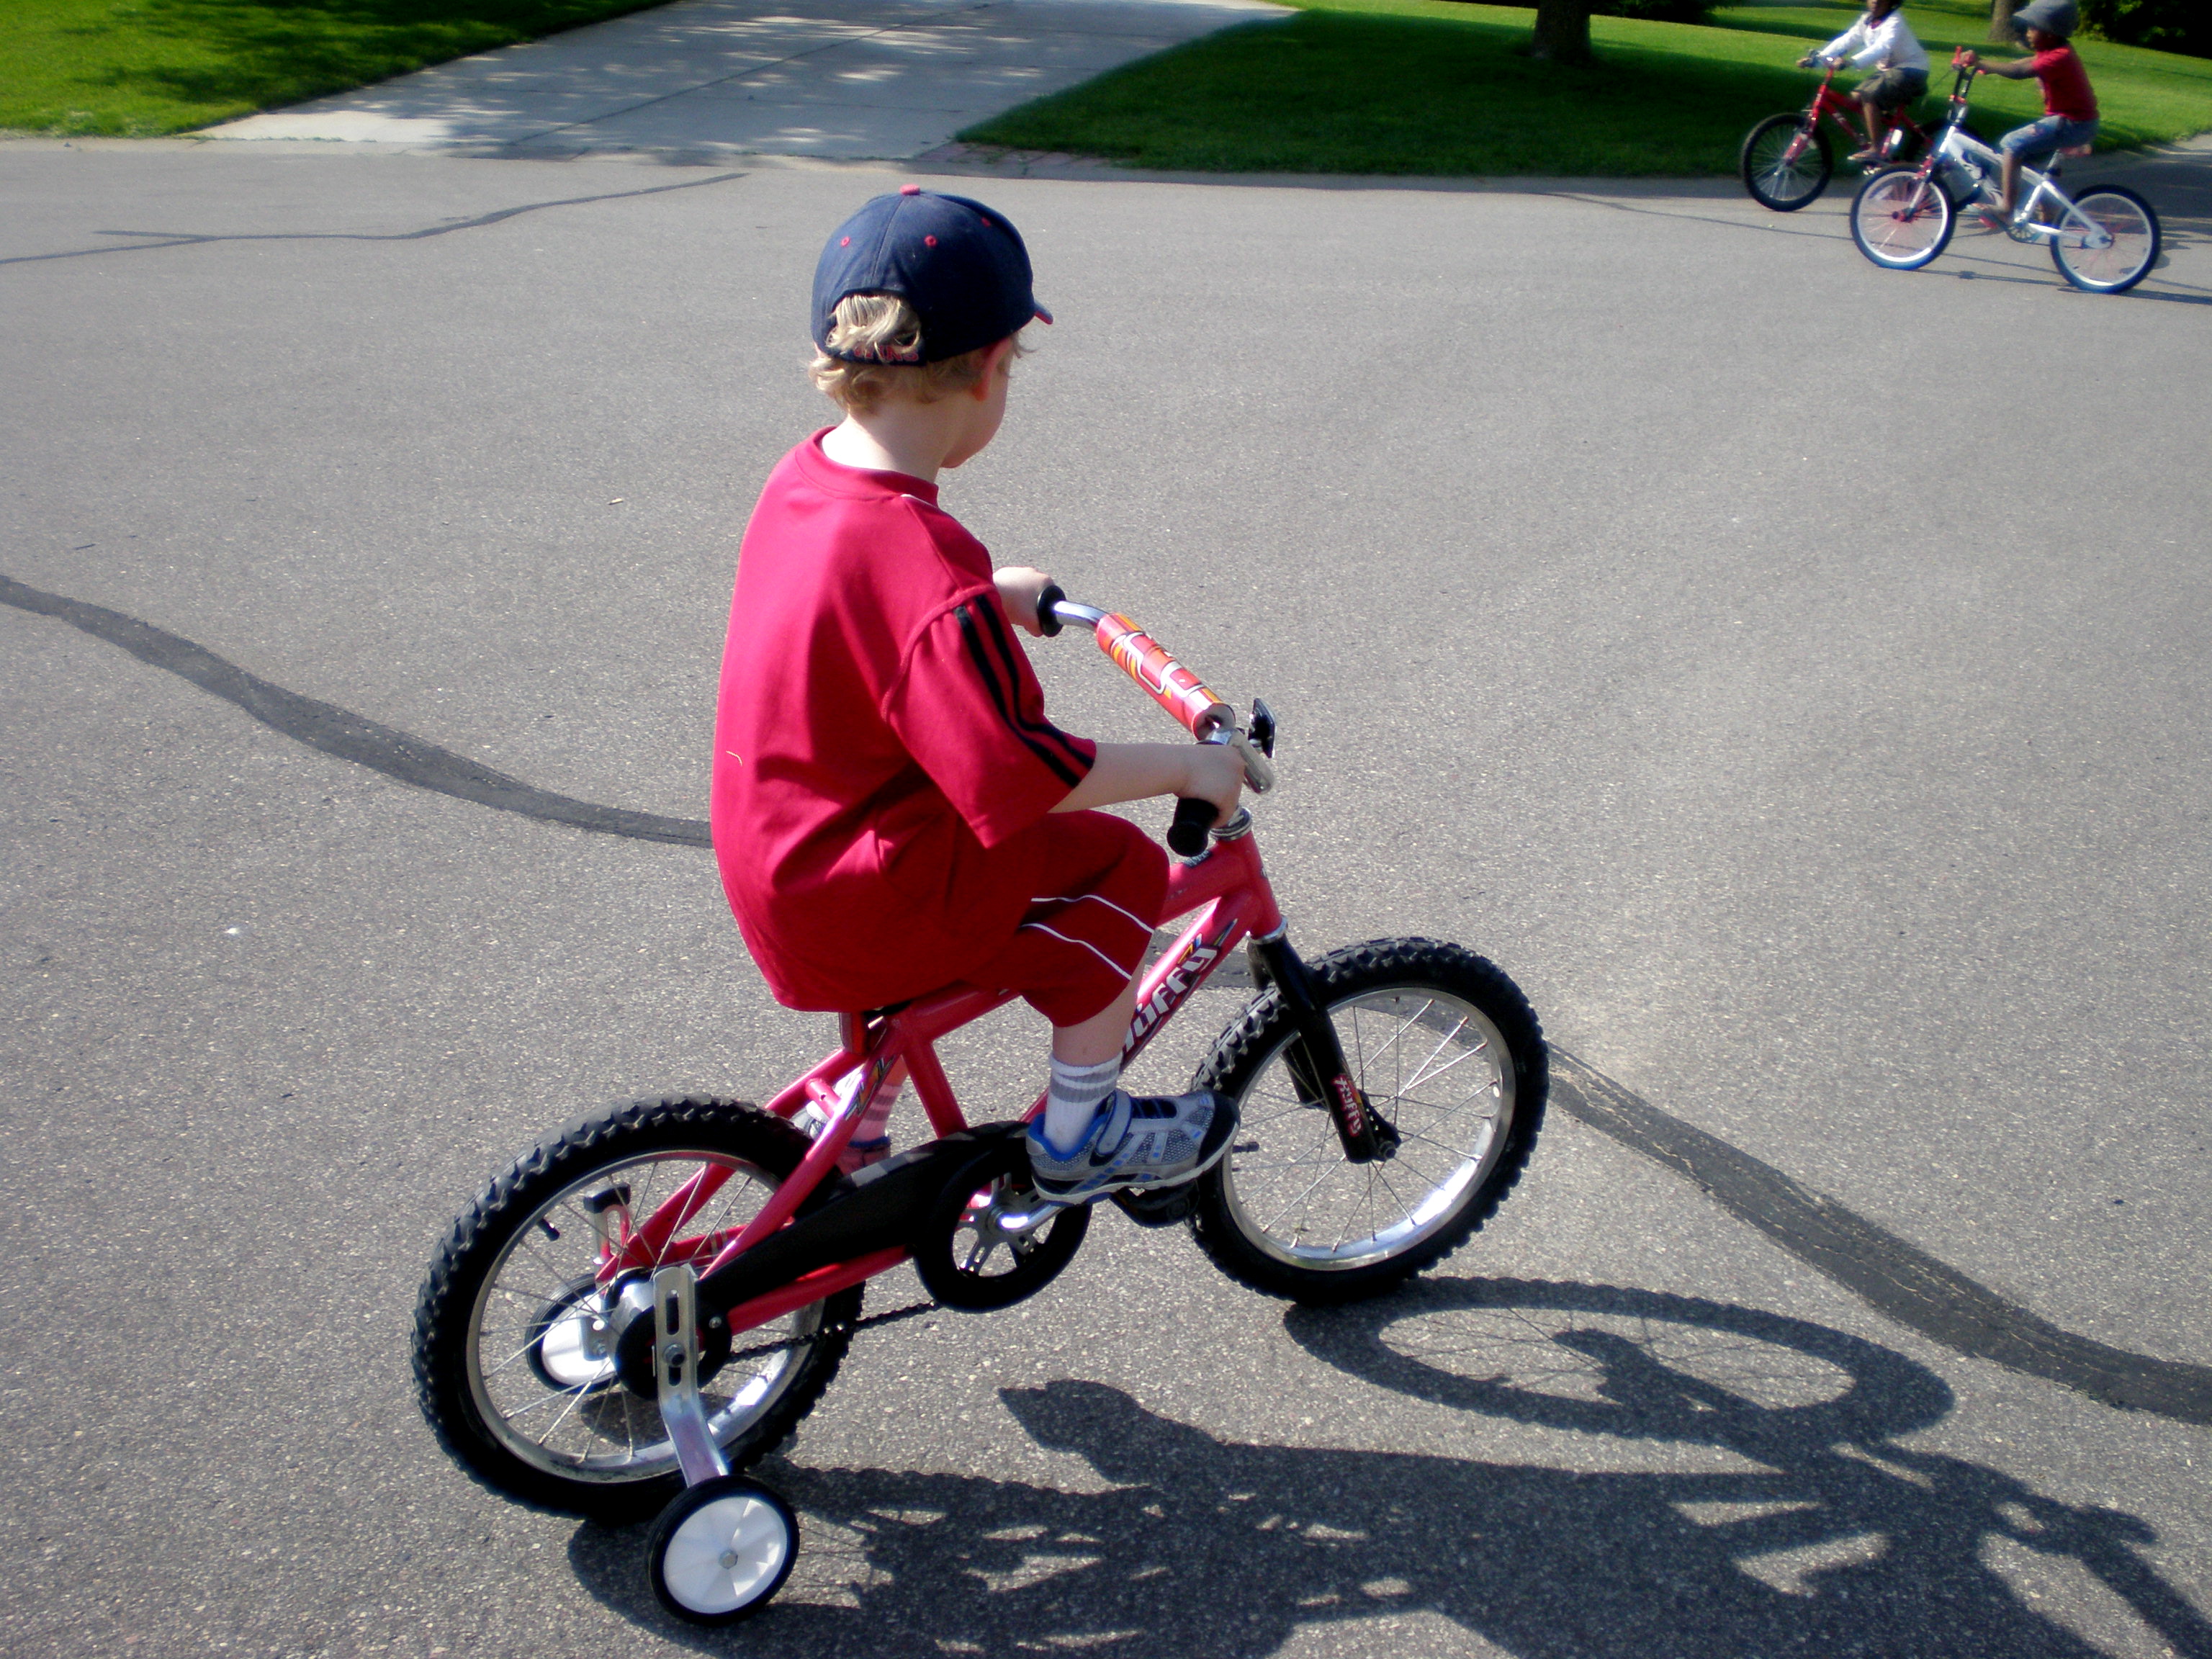 with training wheels